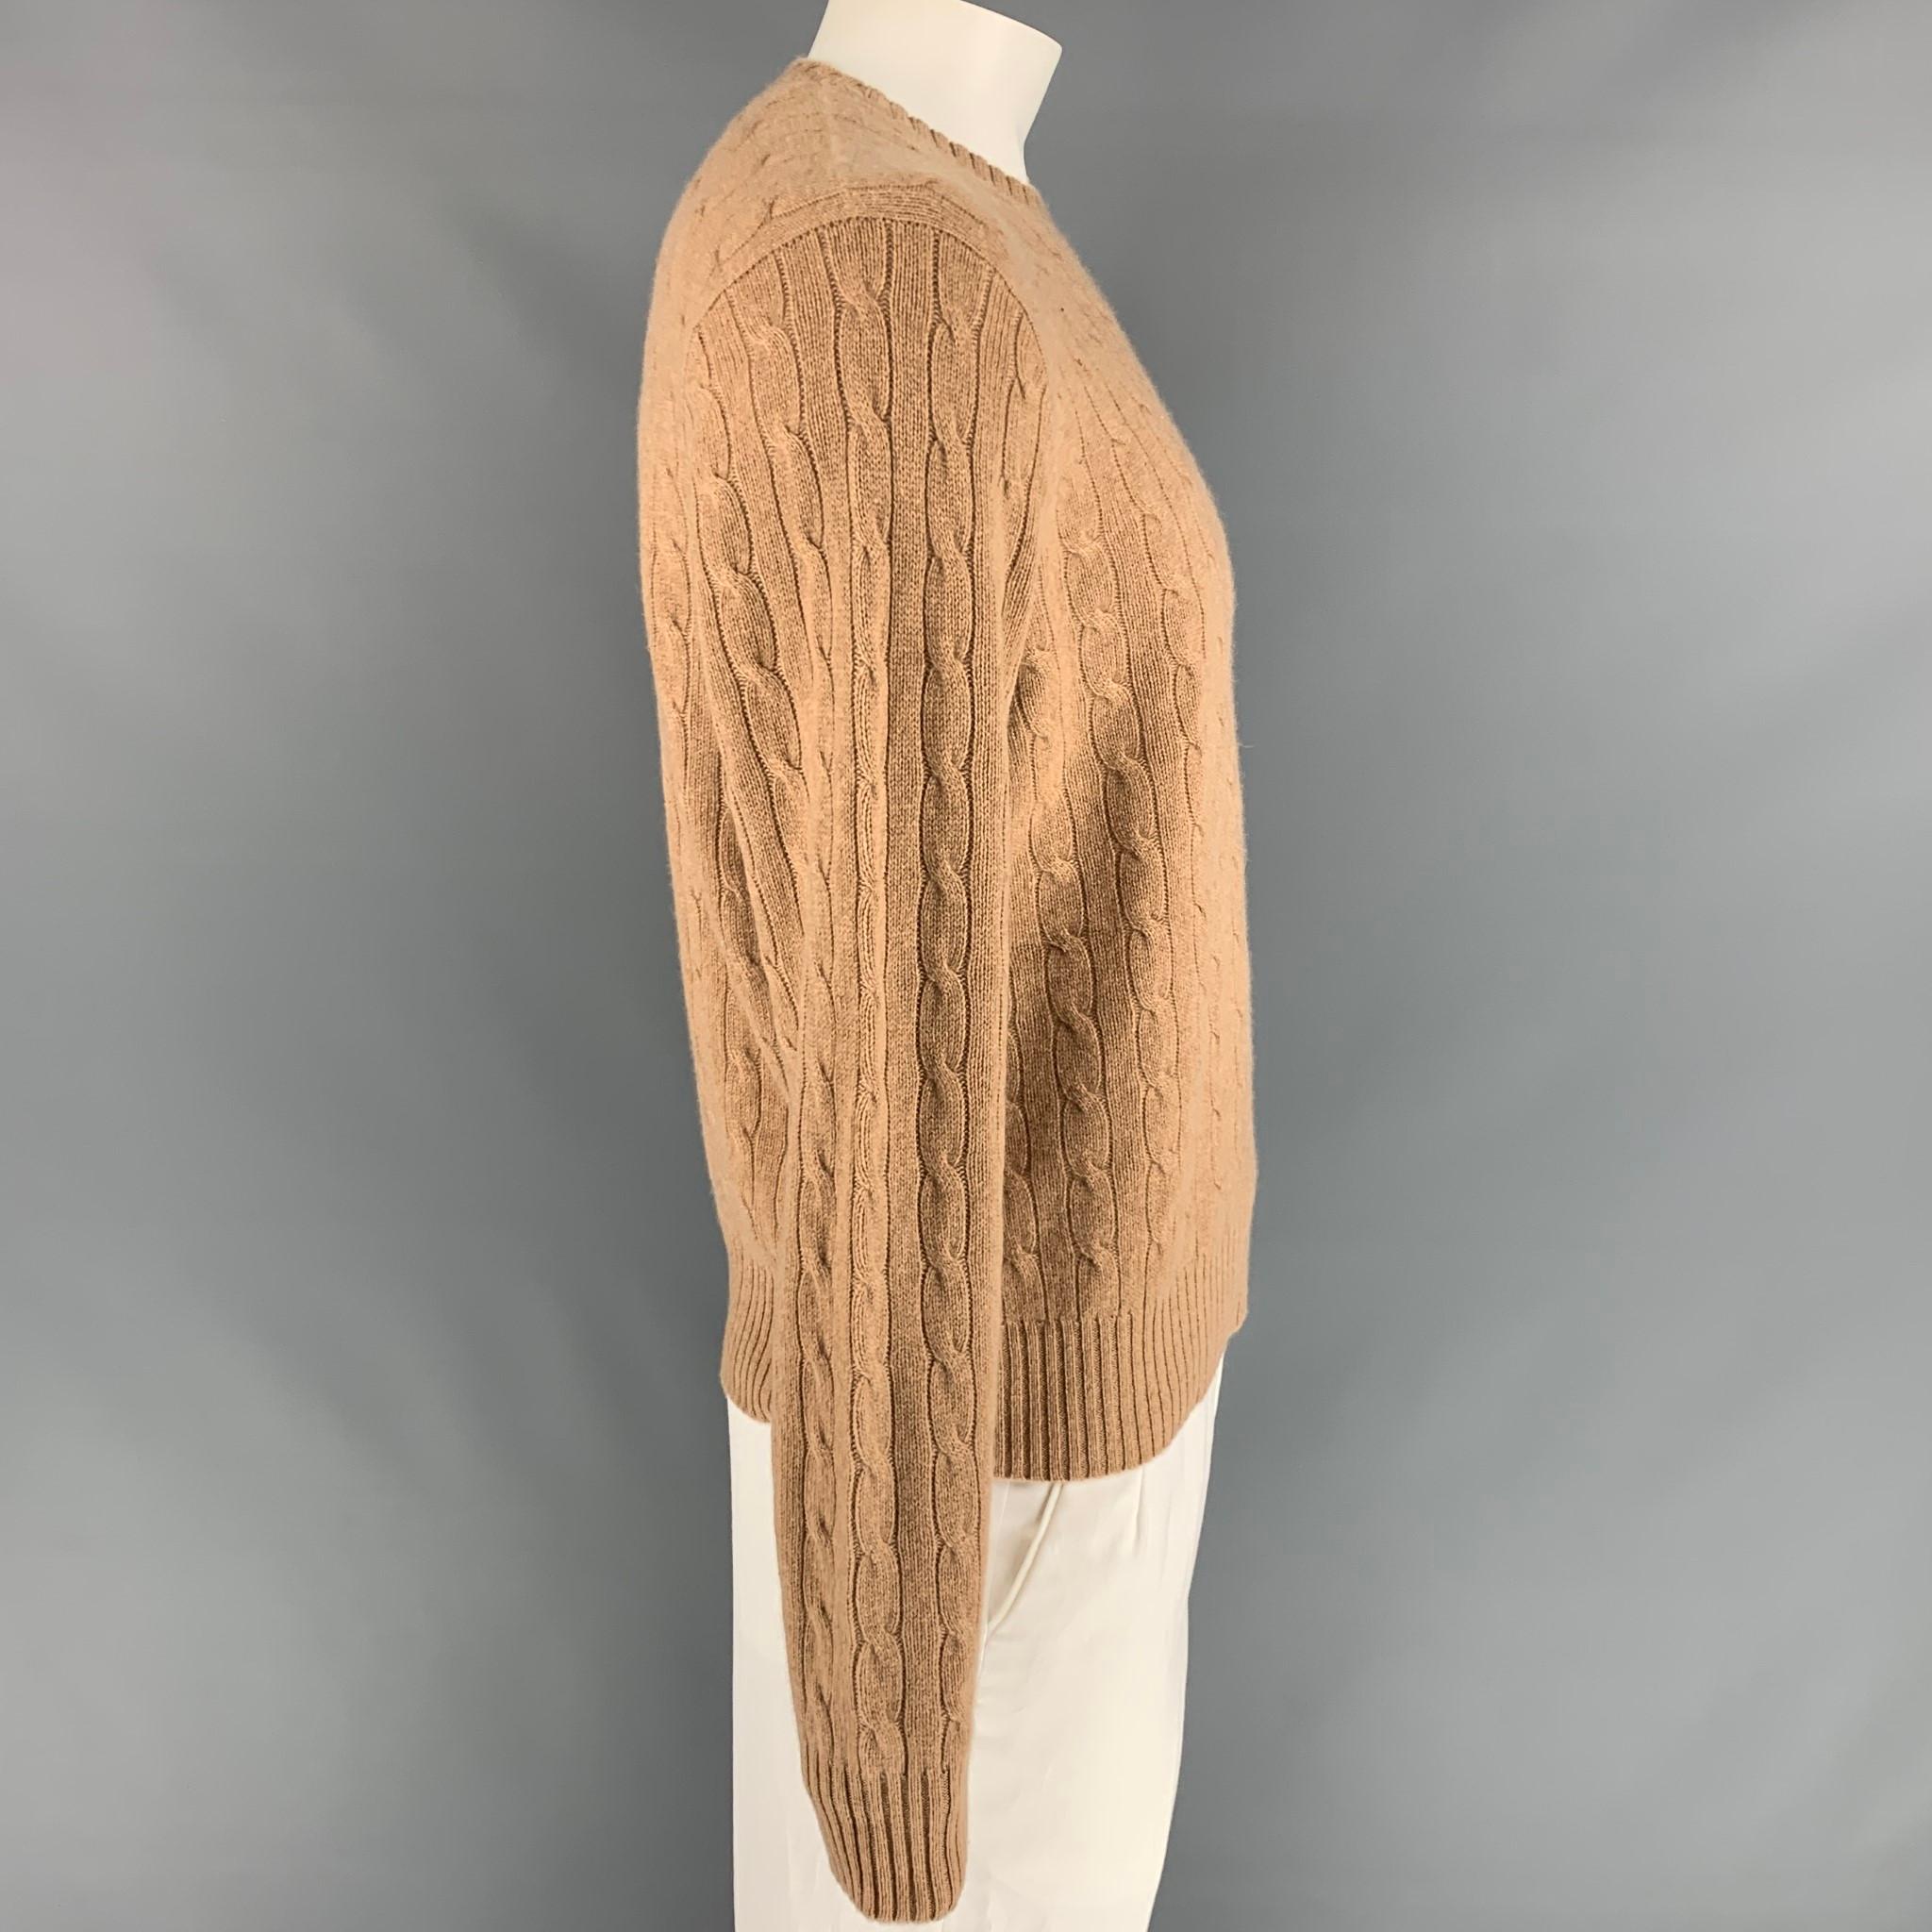 RALPH LAUREN sweater comes in a camel cable knit cashmere featuring a crew-neck. 

New With Tags. 
Marked: L

Measurements:

Shoulder: 20 in.
Chest: 46 in.
Sleeve: 29.5 in.
Length: 26 in. 